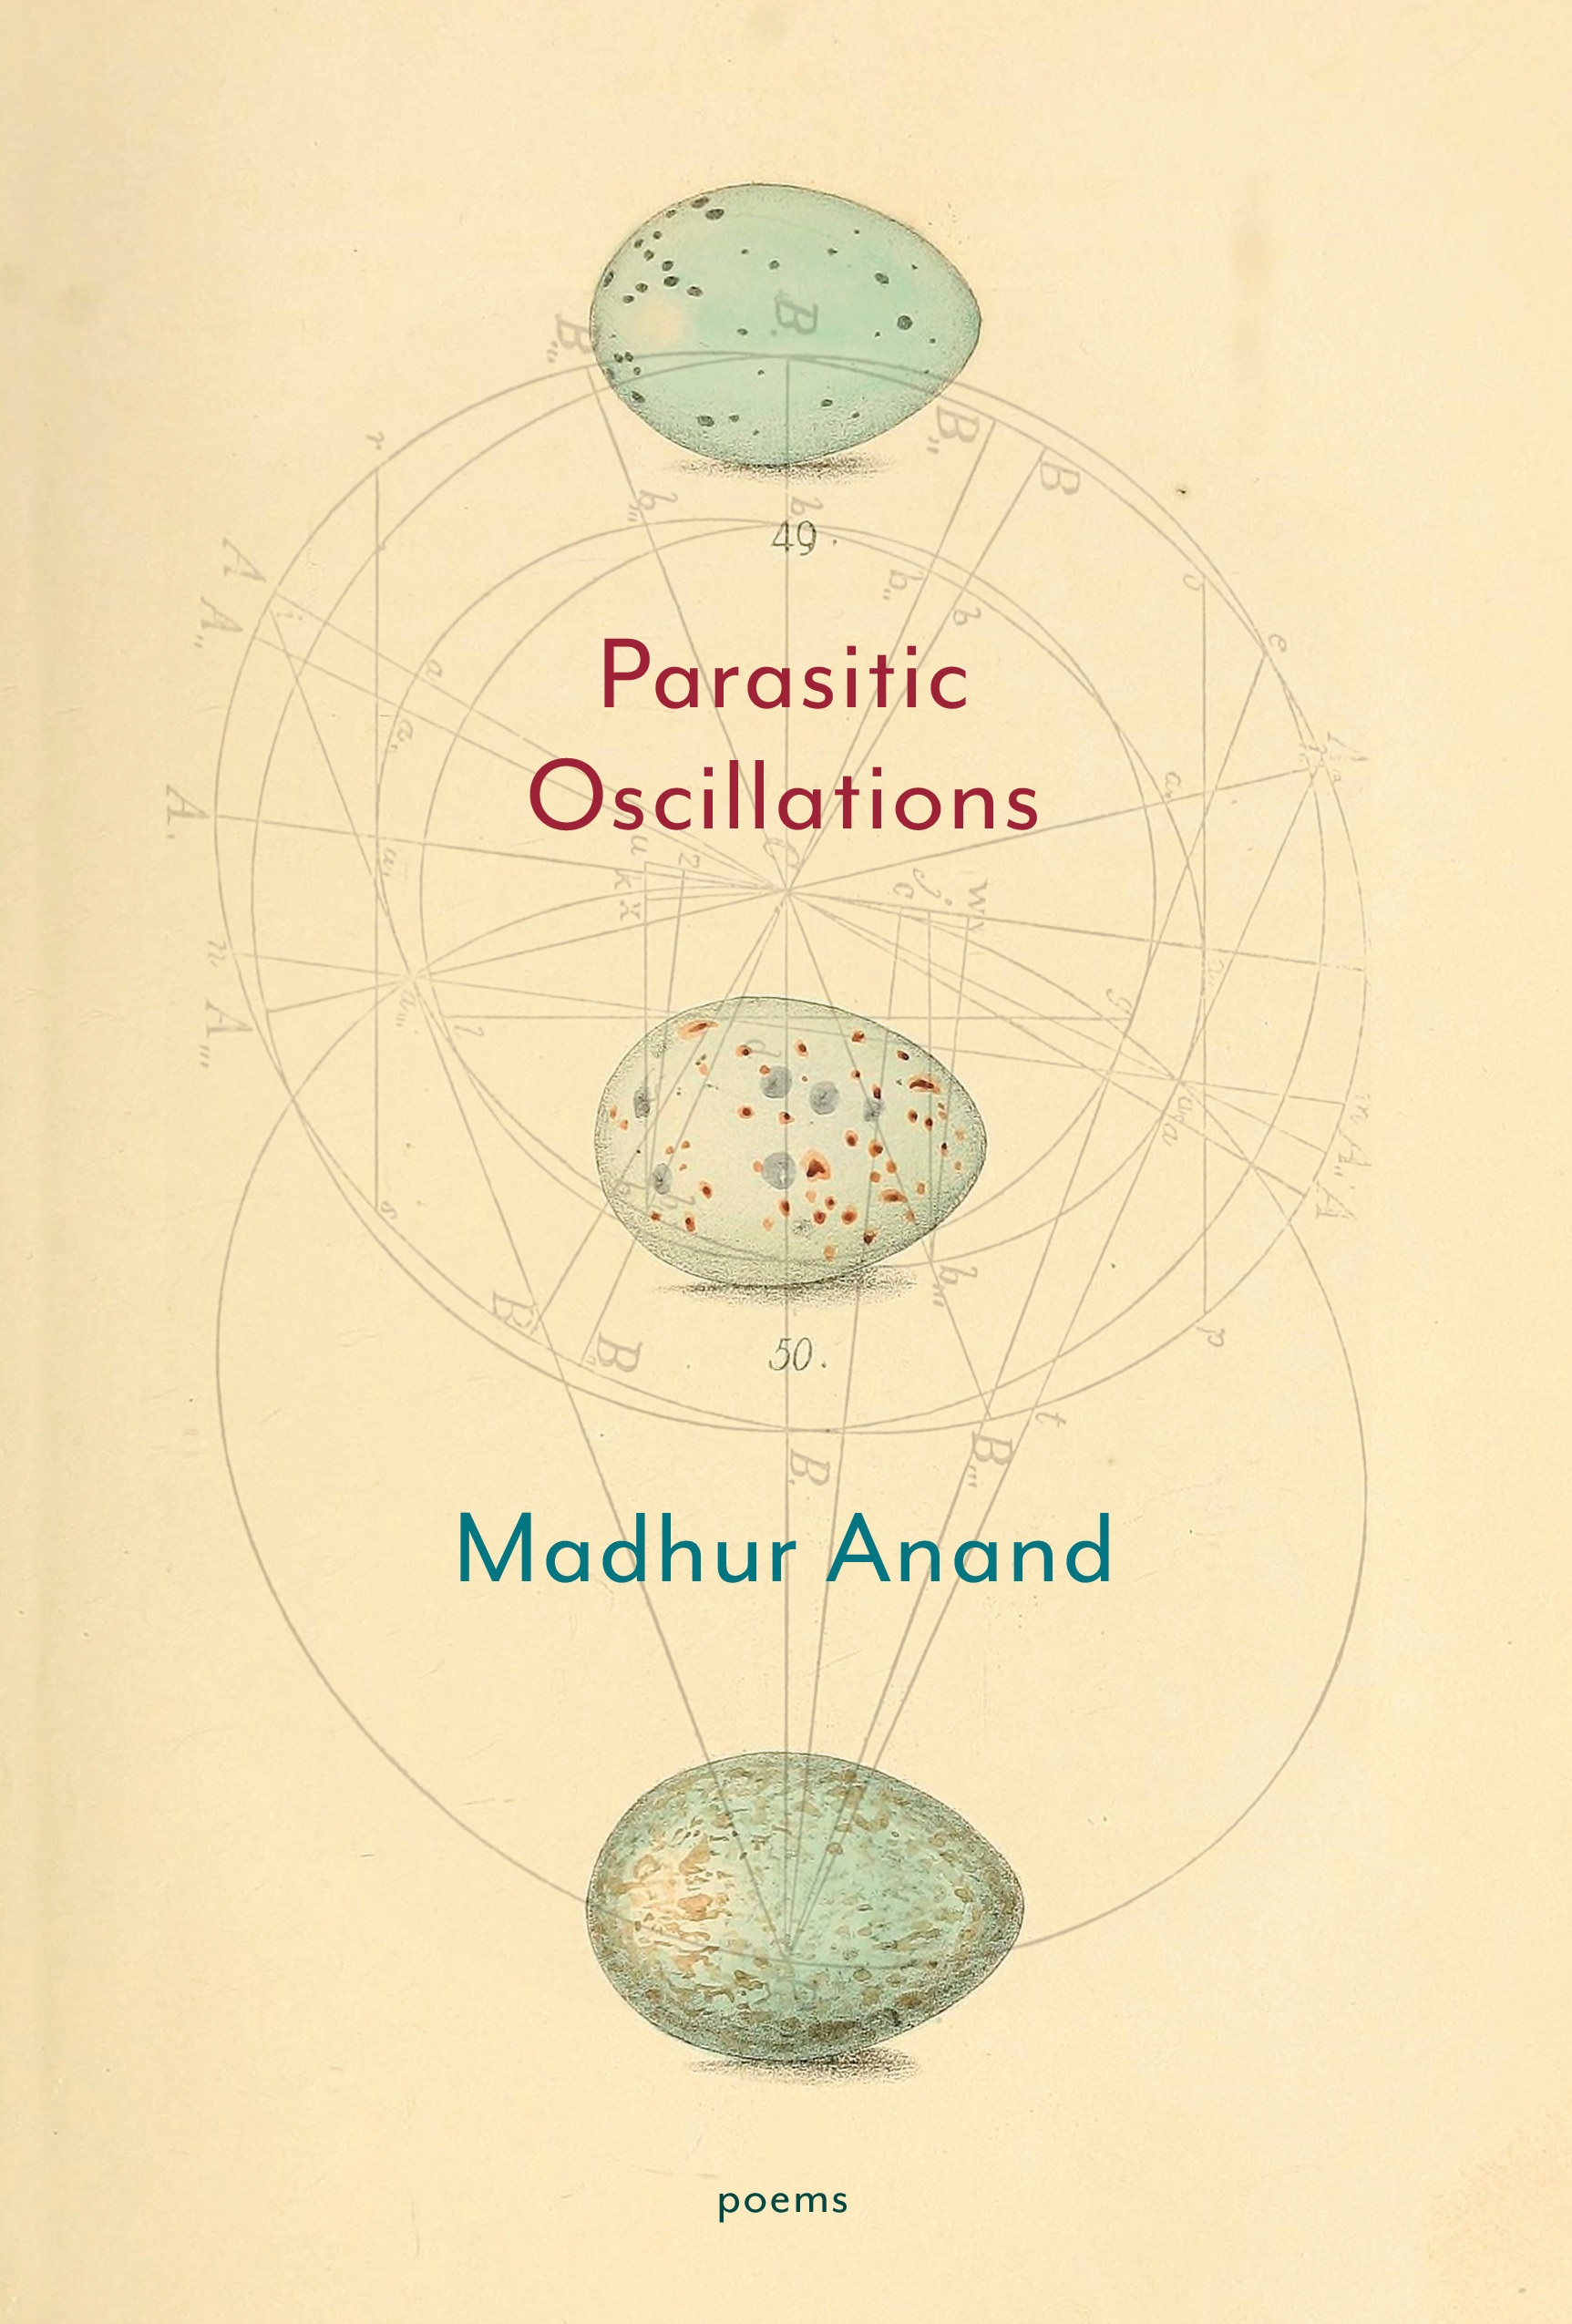 Madhur Anand's Parasitic Oscillations book cover